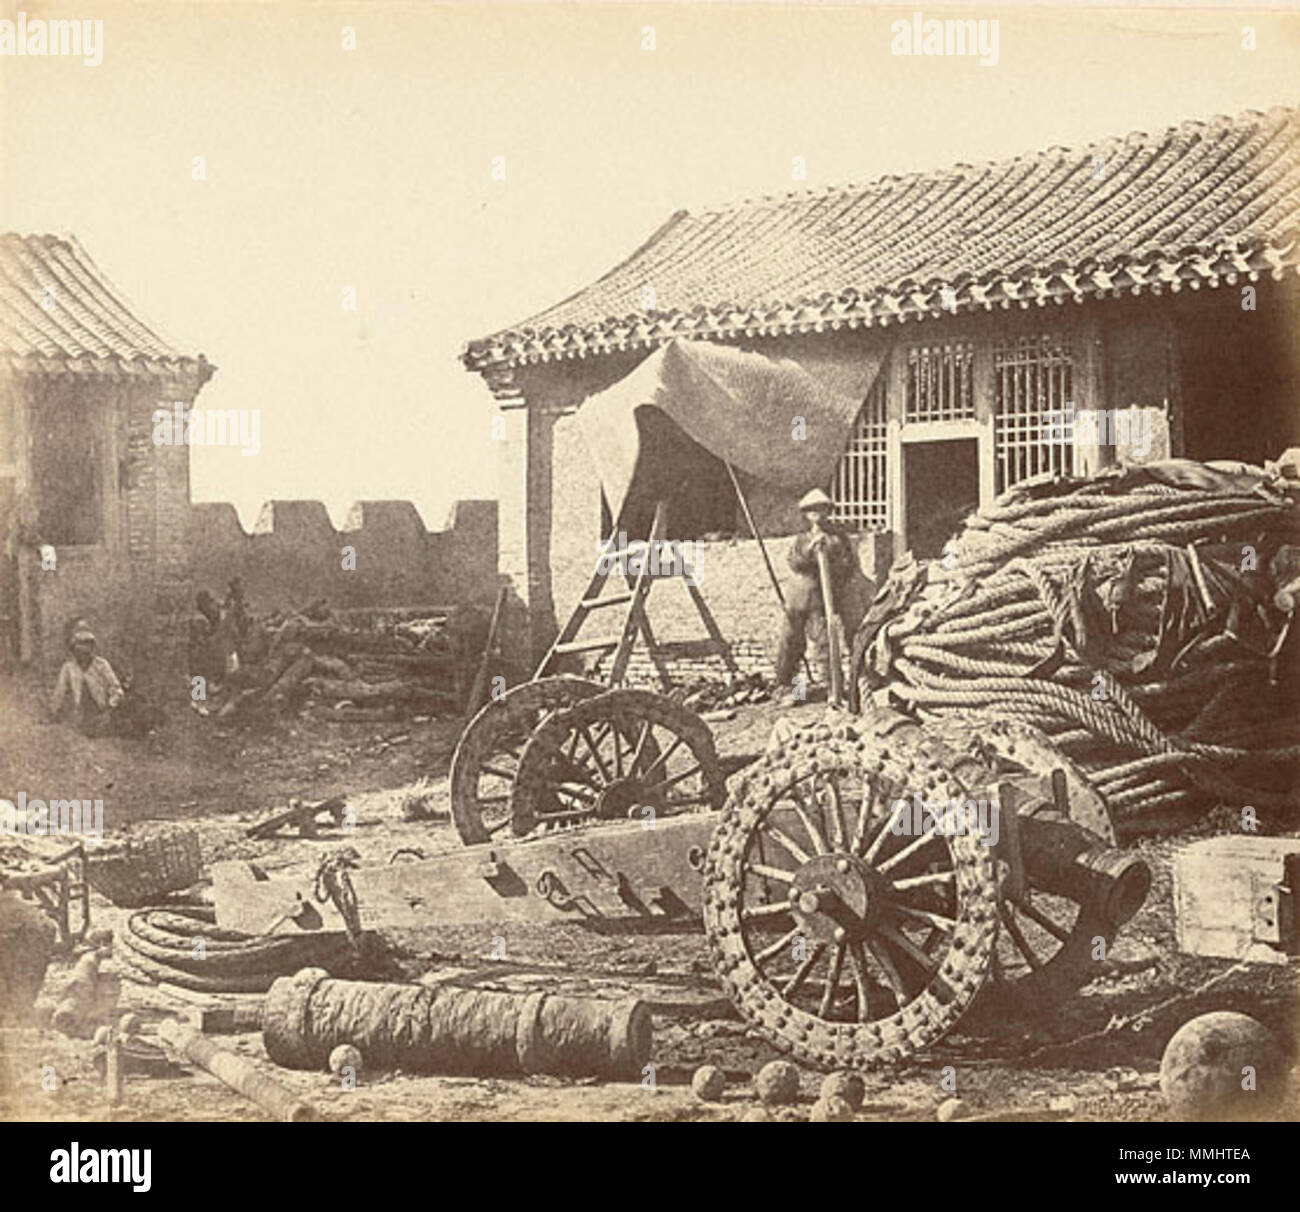 . English: An Pehtang fort was abondoned by the Chinese army. Printed in 1860. 中文（繁體）: 被棄置的北塘砲台。攝於1860年。  . 1 August 1860.   Felice Beato  (1832–1909)     Alternative names Felix Beato  Description Italian photographer, journalist, war photographer and photojournalist  Date of birth/death 1832 (or perhaps as late as 1834) 29 January 1909 (or perhaps as early as 1907)  Location of birth/death Venice, Austria-Hungary Florence, Italy  Work period 19th century  Authority control  : Q318352 VIAF:?95698883 ISNI:?0000 0001 1798 1448 LCCN:?n85044155 GND:?118987186 SELIBR:?245768 WorldCat    (???·??)  Stock Photo